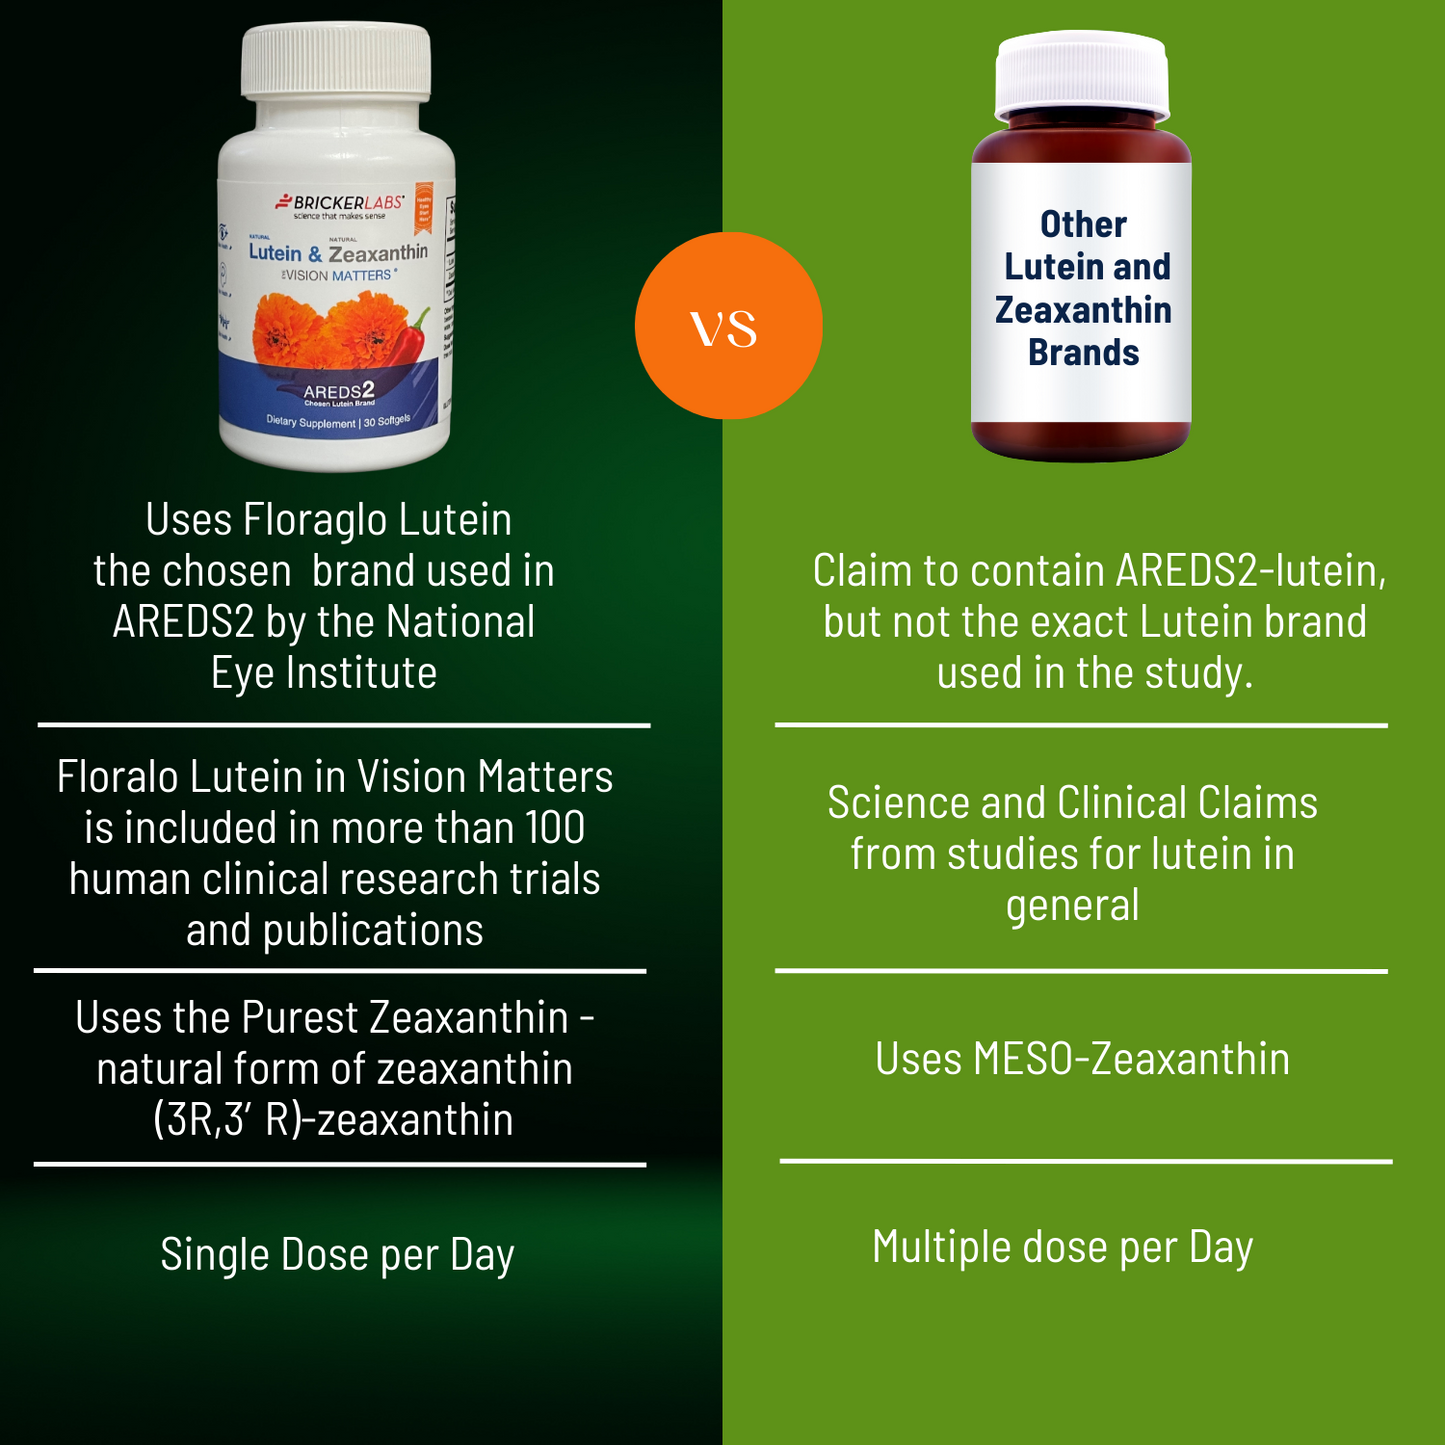 Vision Matters®: Natural Lutein and Zeaxanthin